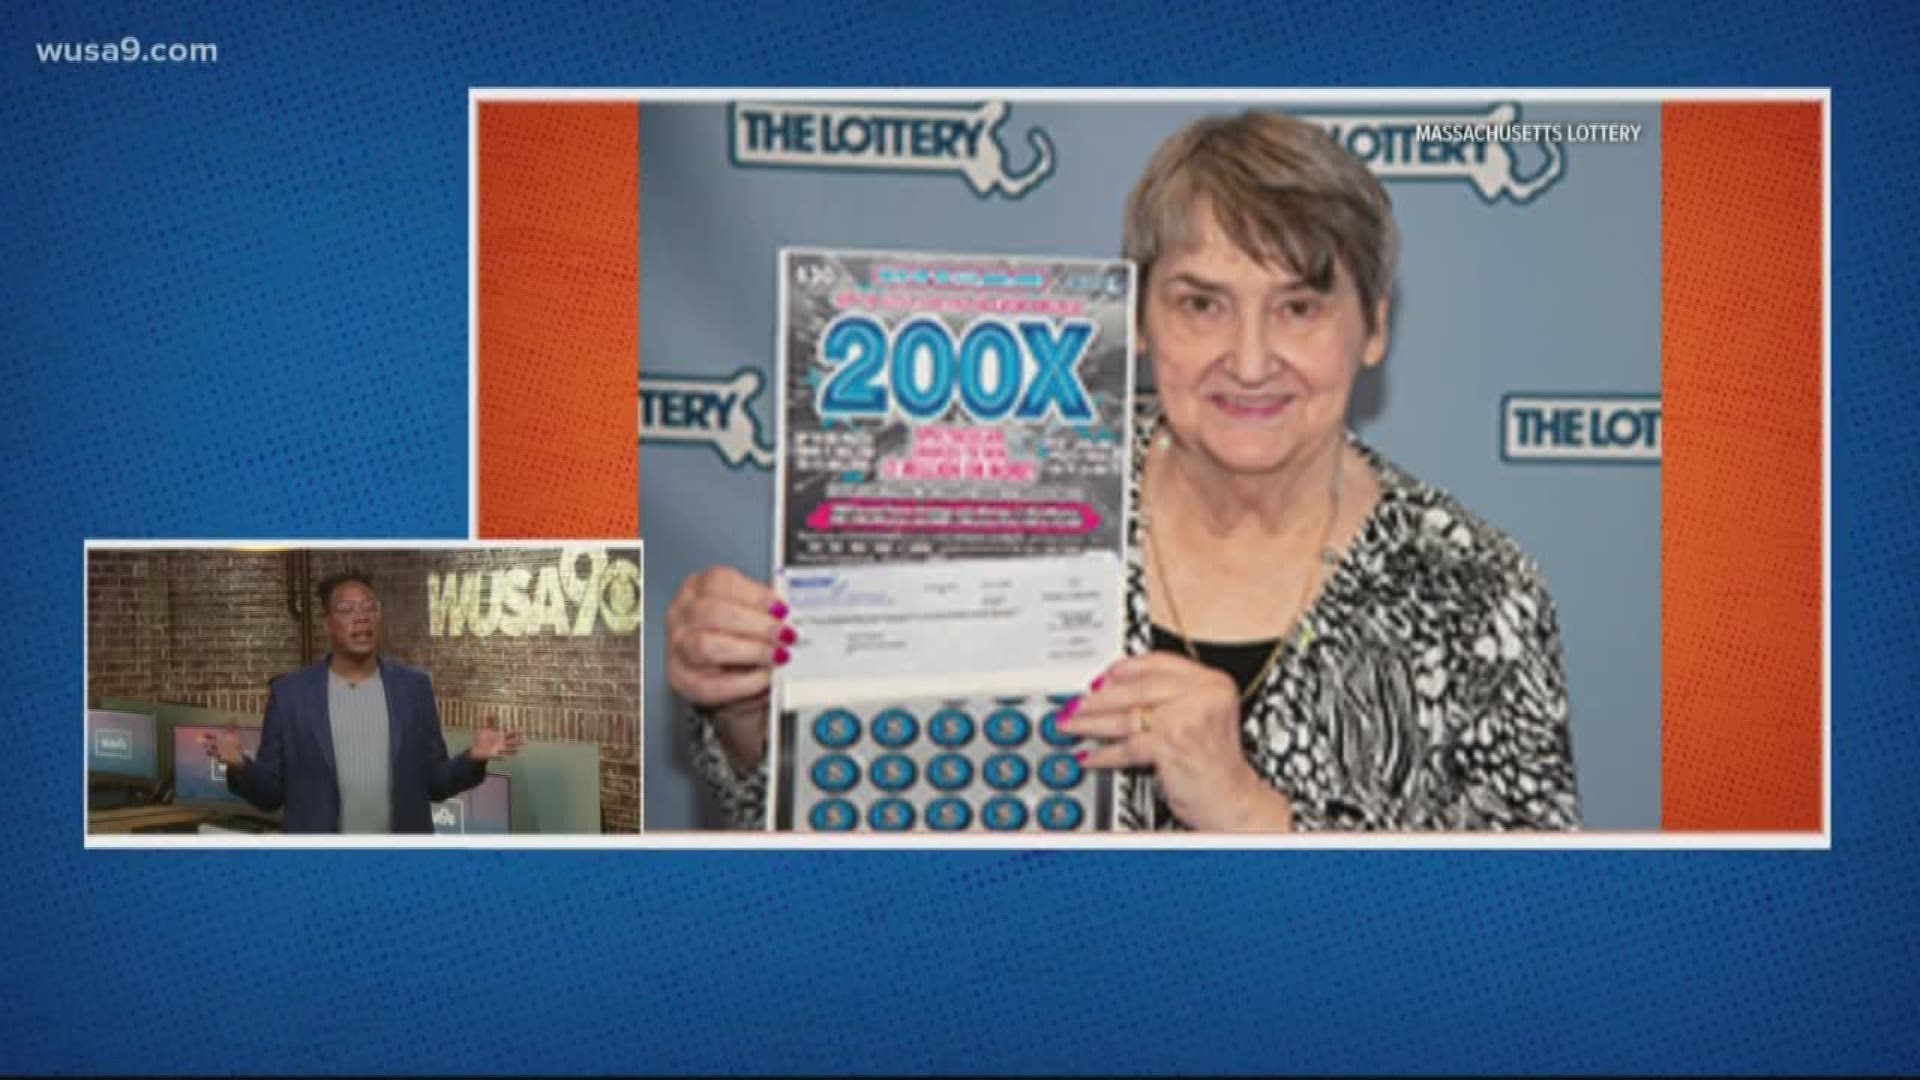 A Massachusetts woman collected her second million-dollar jackpot in just 10 years. This is In Other News, with news that isn't on your radar but should be.